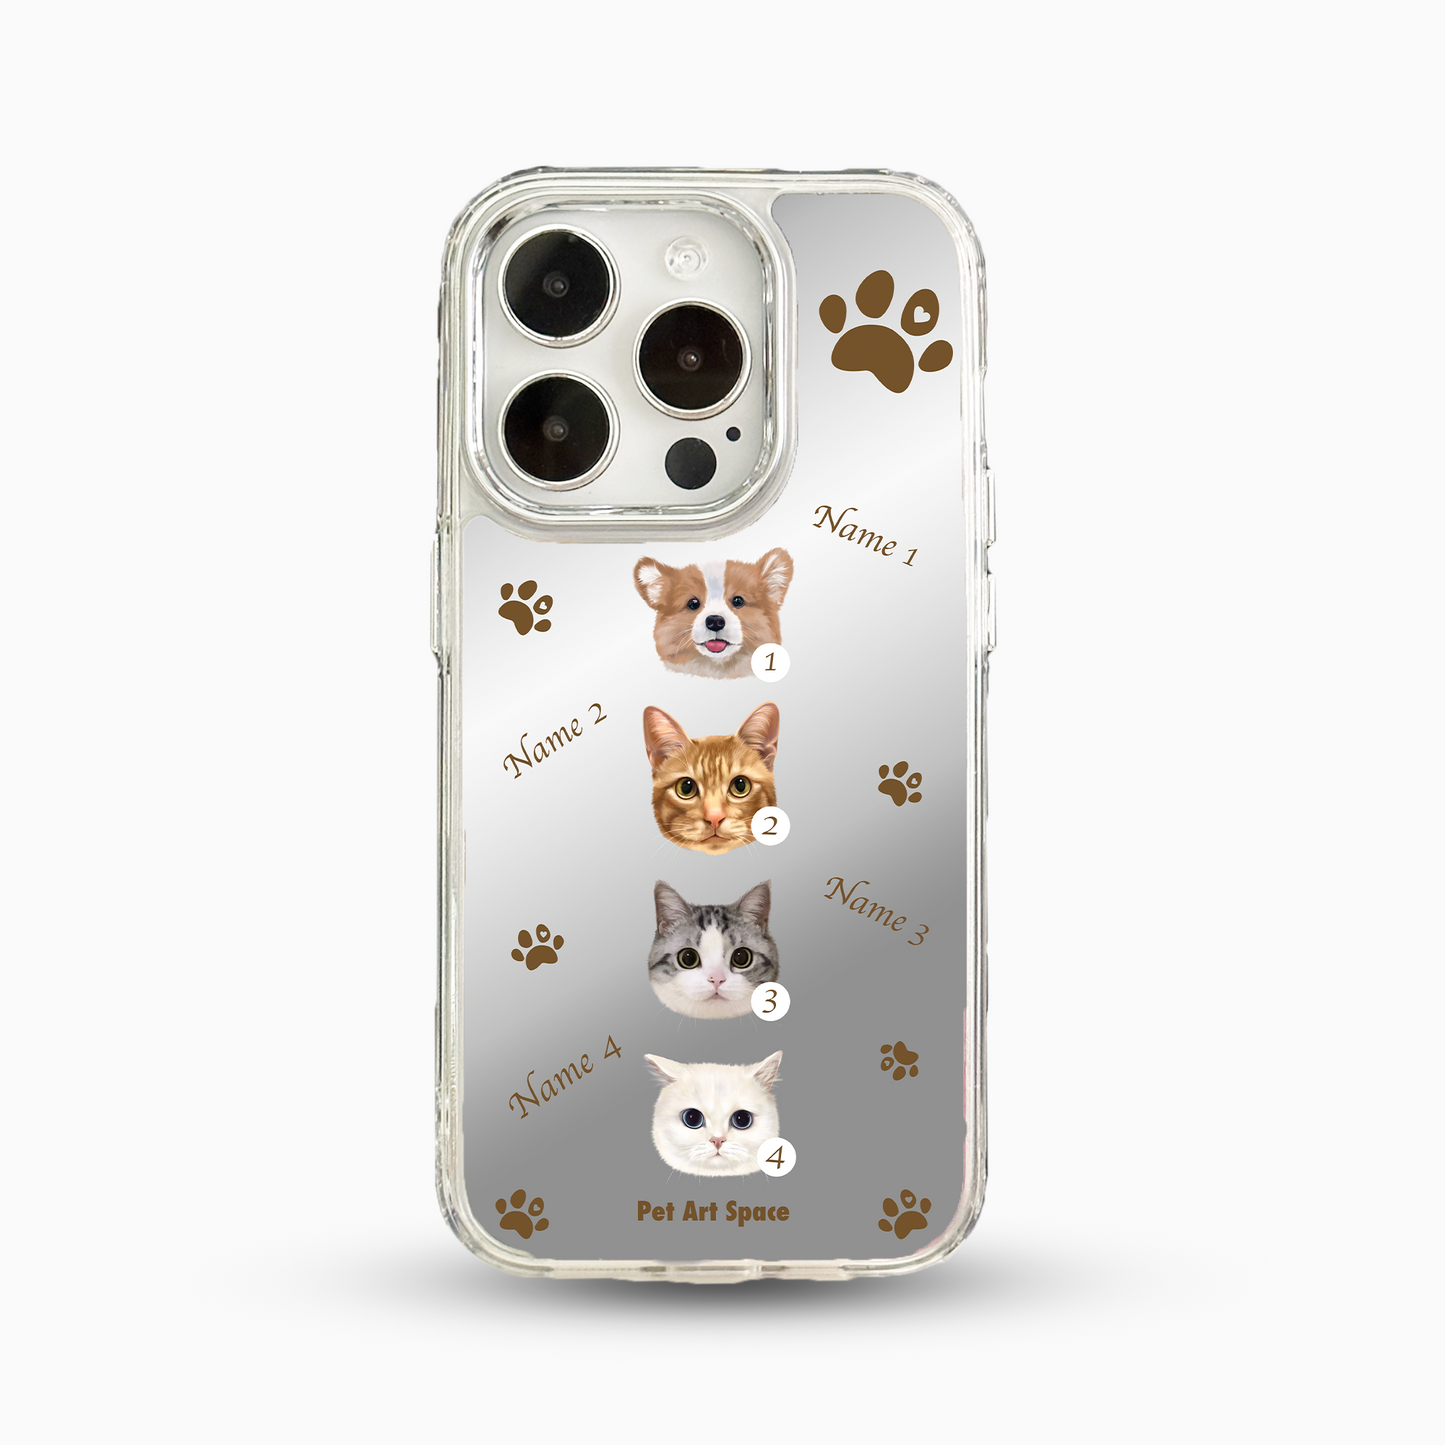 Paws for 4 Pets - Mirror Case C